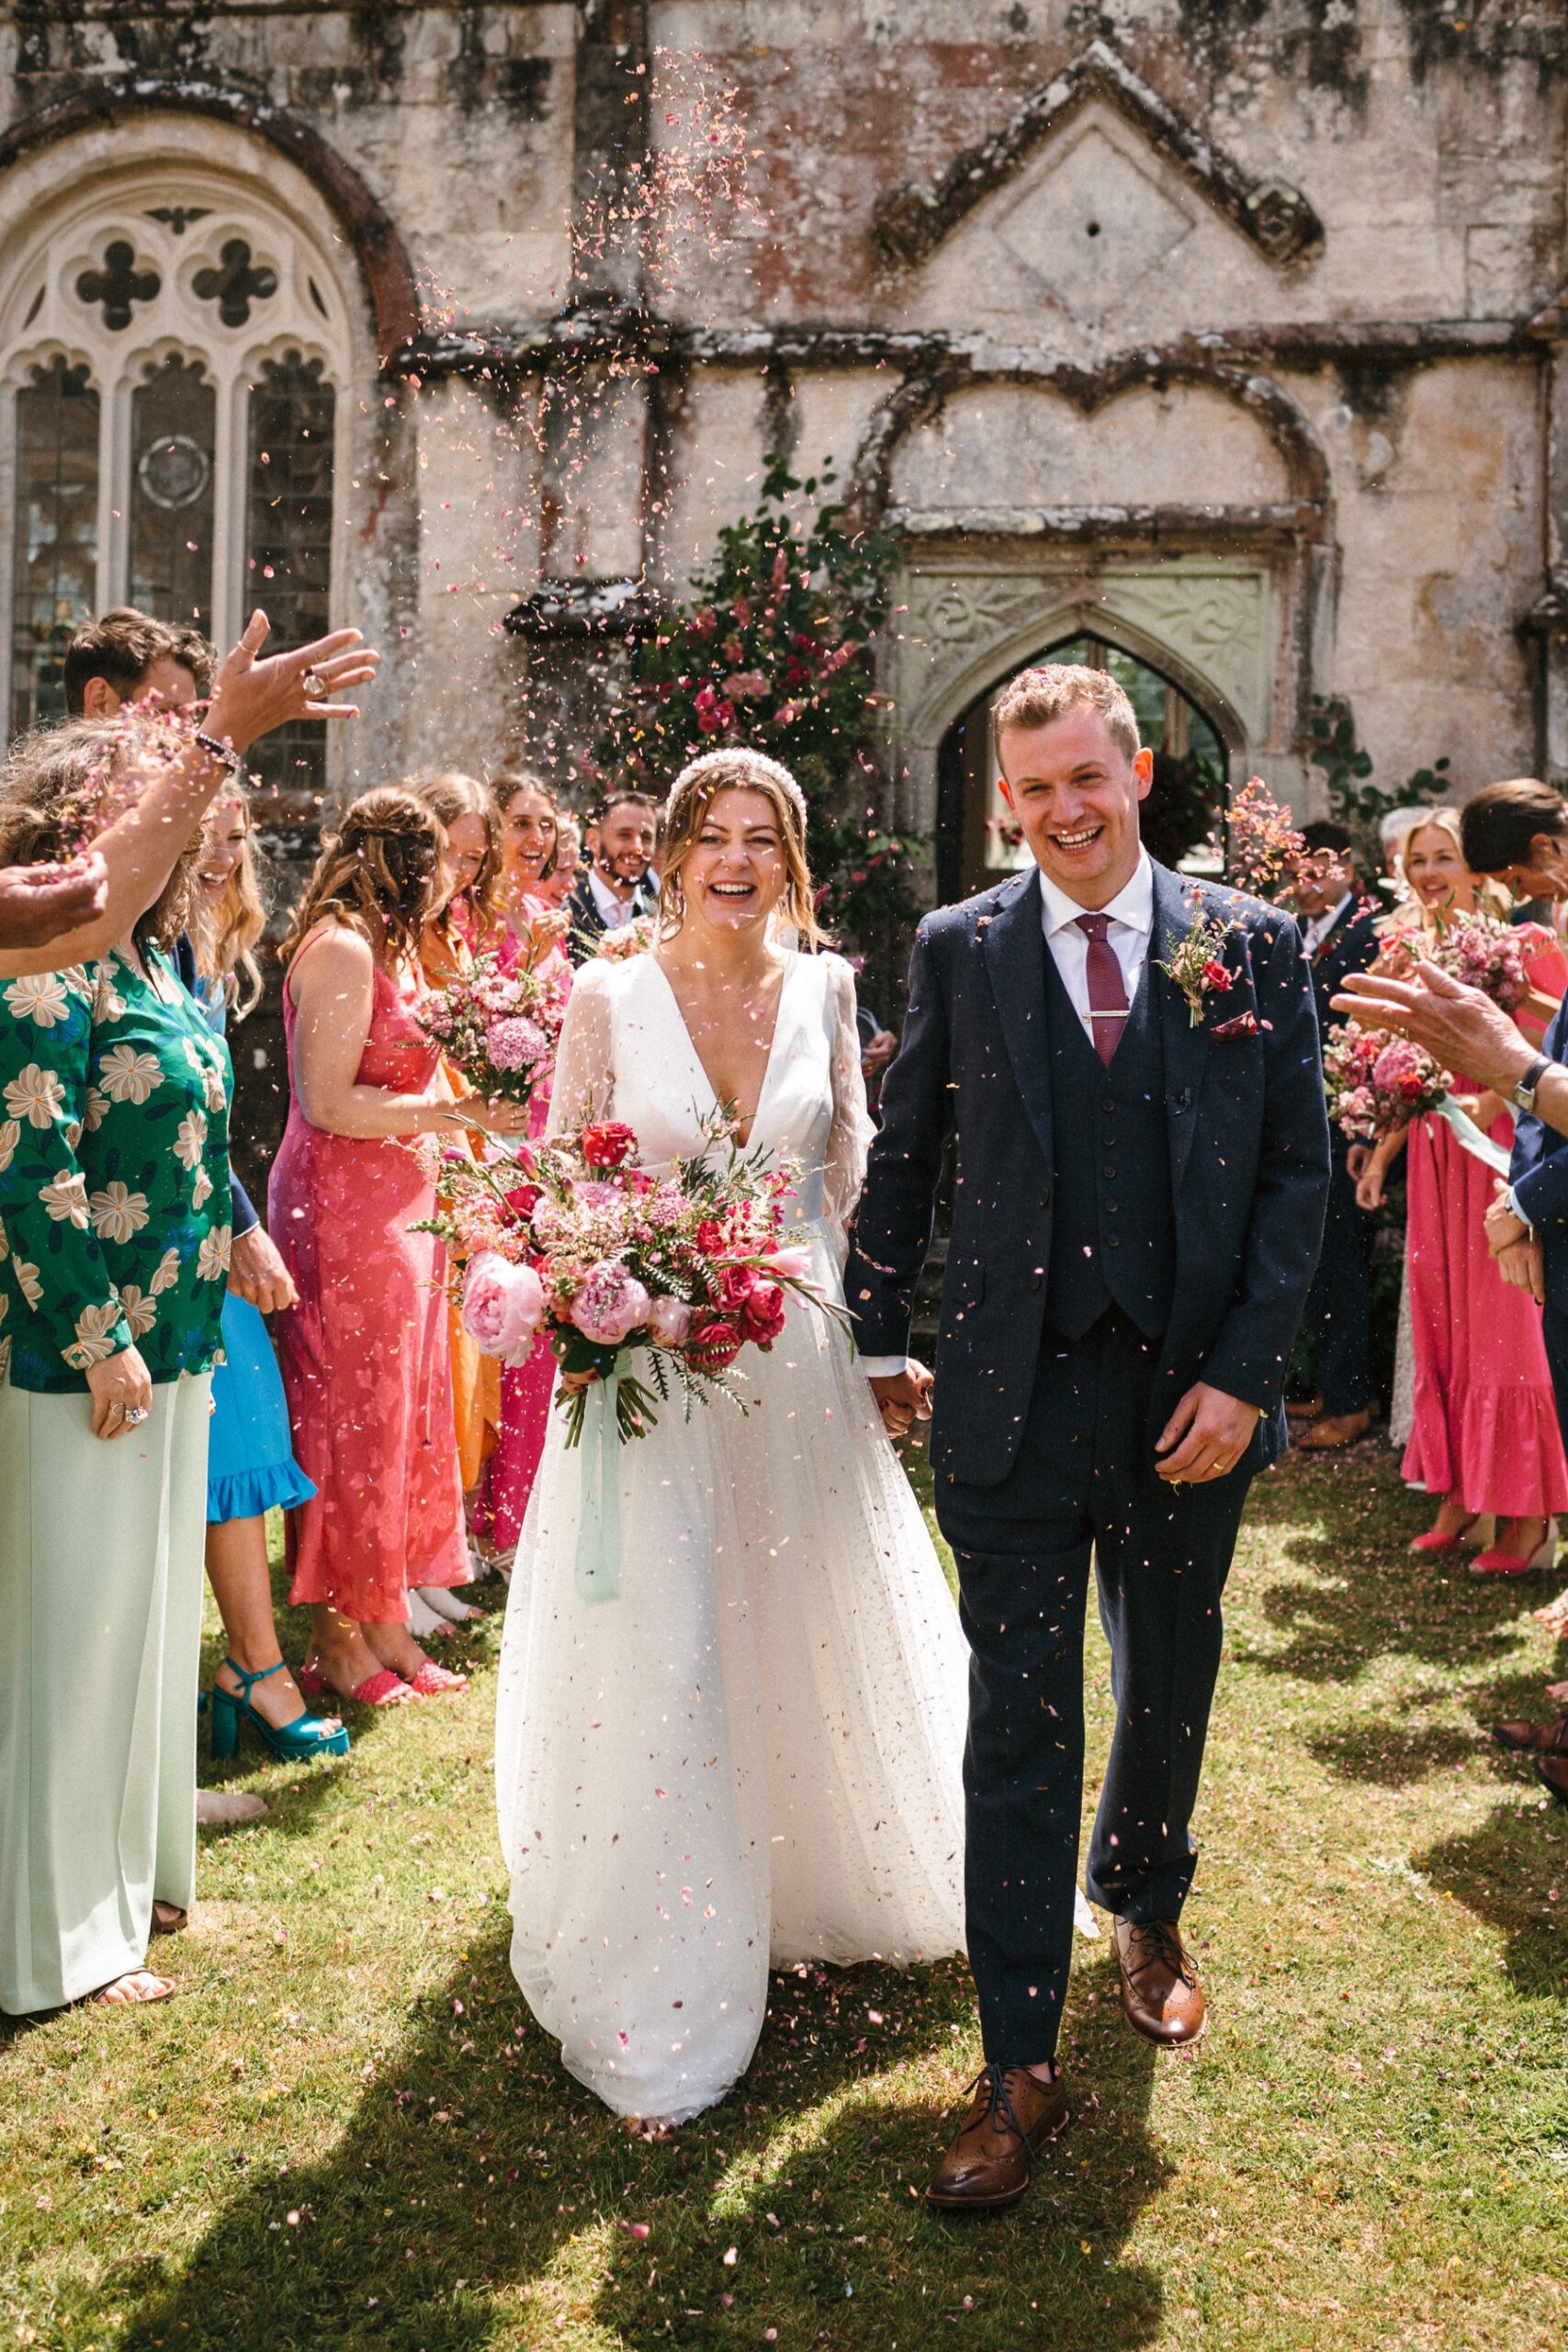 Get the best confetti photos! Captured by Wedding photographer Cornwall Freckle  photography at Trelowarren Estate